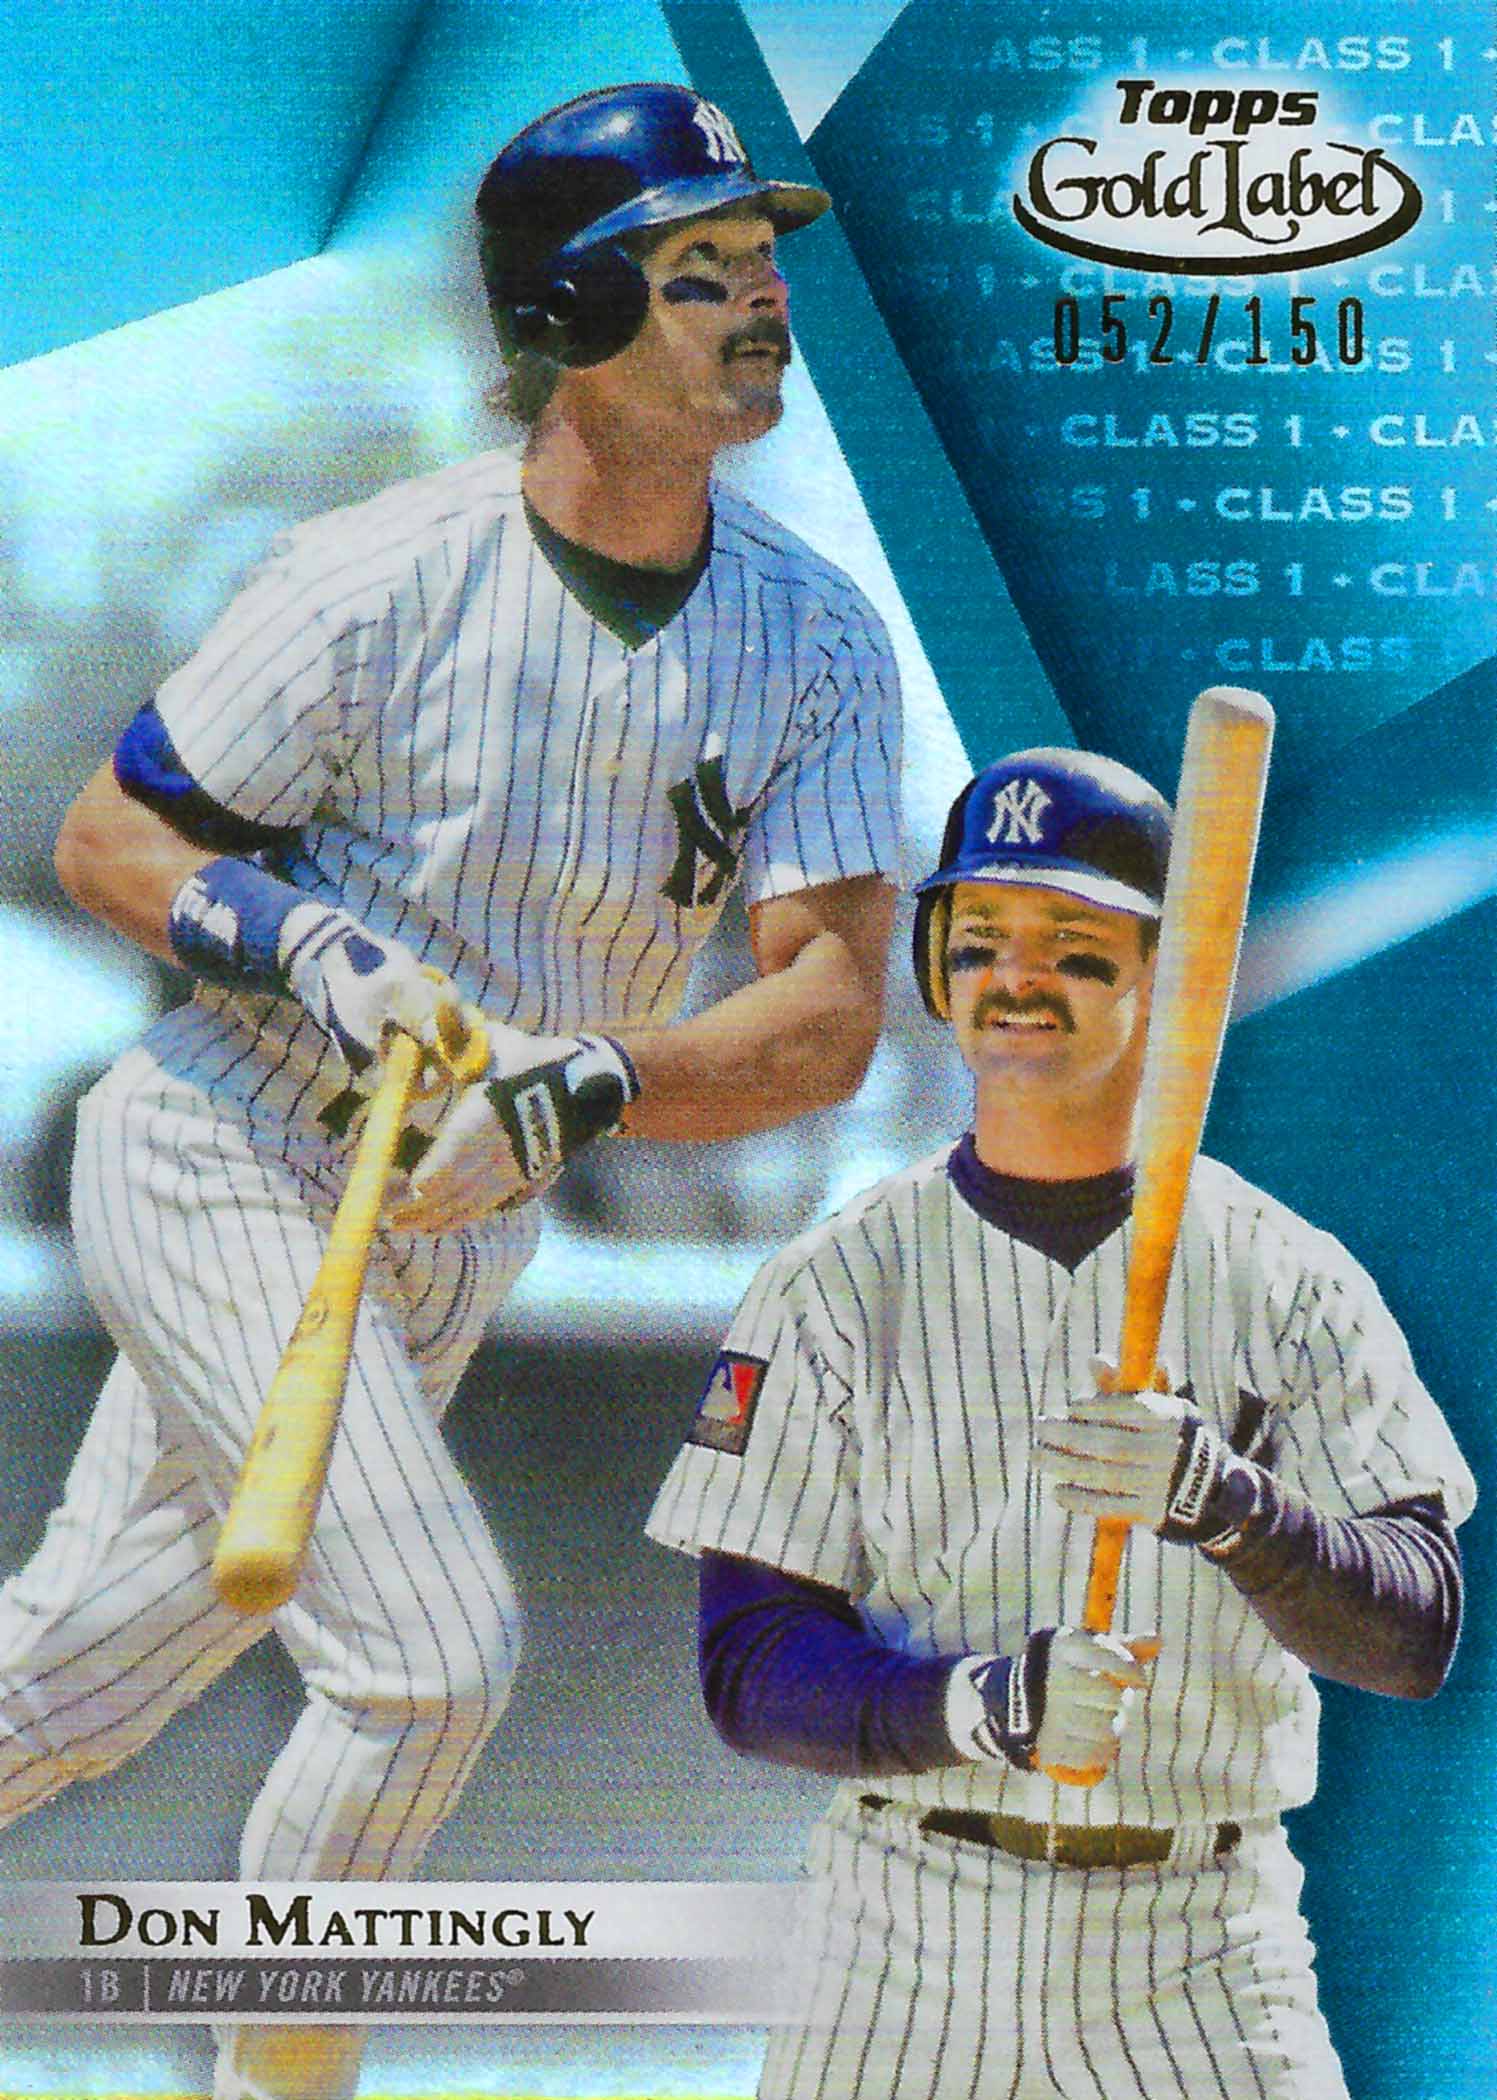 2018 Topps Gold Label Class 1 Blue